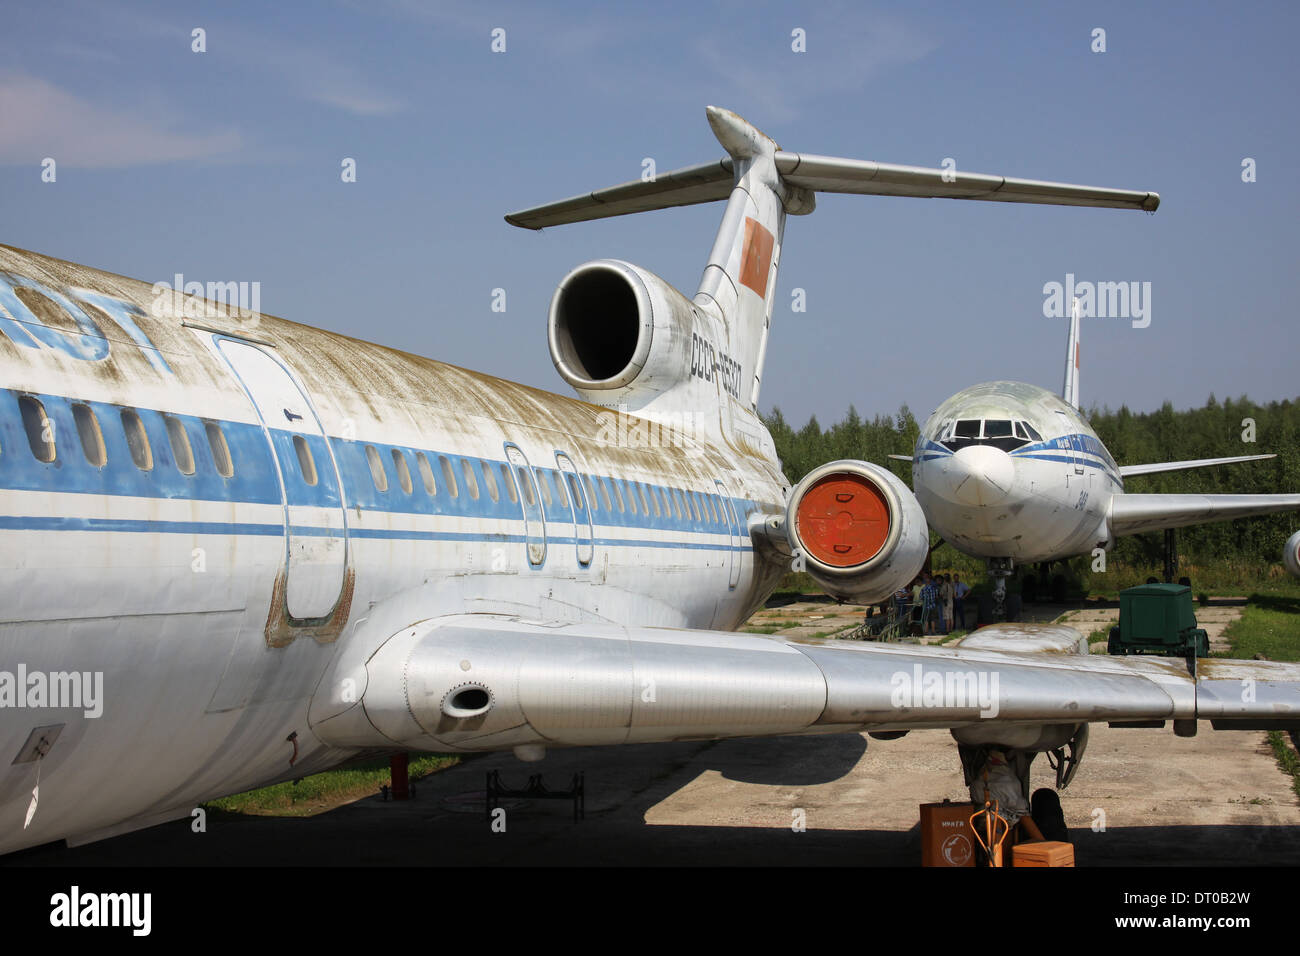 Two Russian Airliners rotting away at Moscow SVO Airport Stock Photo